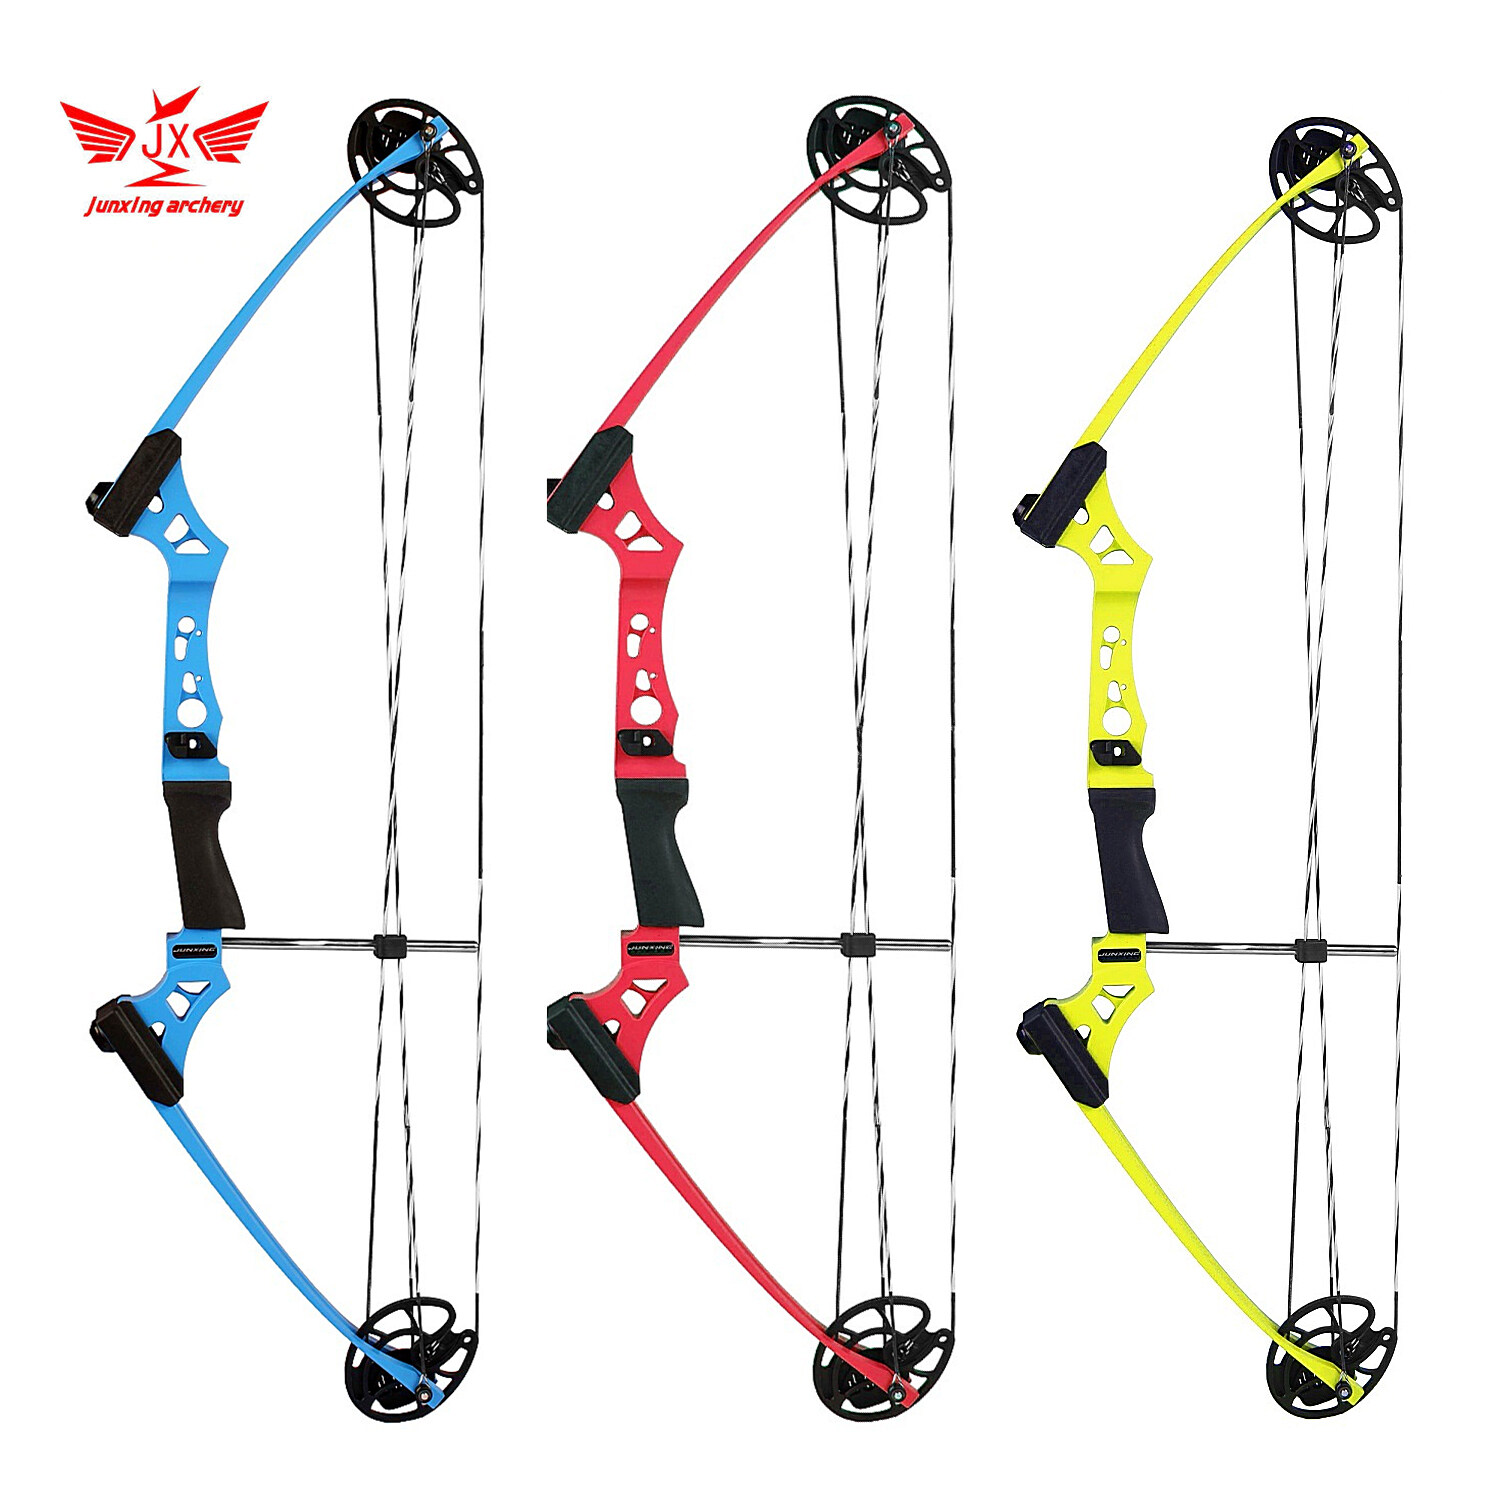 10-20 Pounds Junxing J007 (มือขวา RH) Compound Bow with Aluminum Handle and Glass Fiber Bow Limbs for Children Games